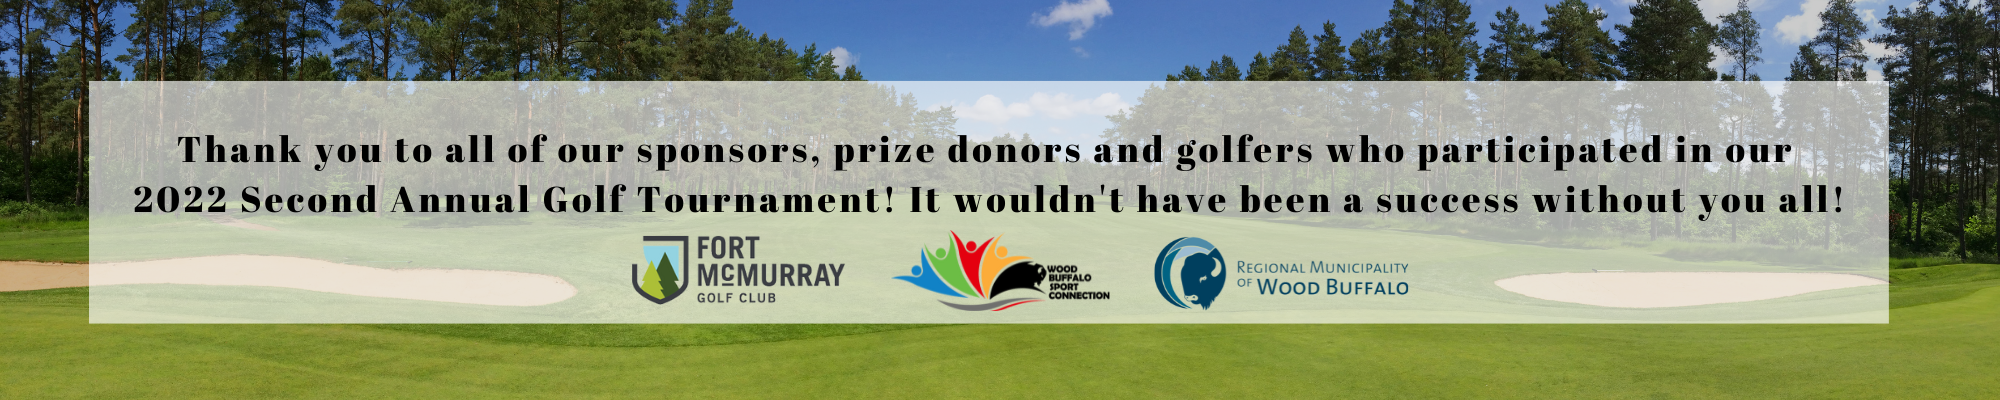 Thank you to all of our sponsors, prize donors and golfers who participated in our  2022 Second Annual Golf Tournament! It wouldn't have been a success without you all!